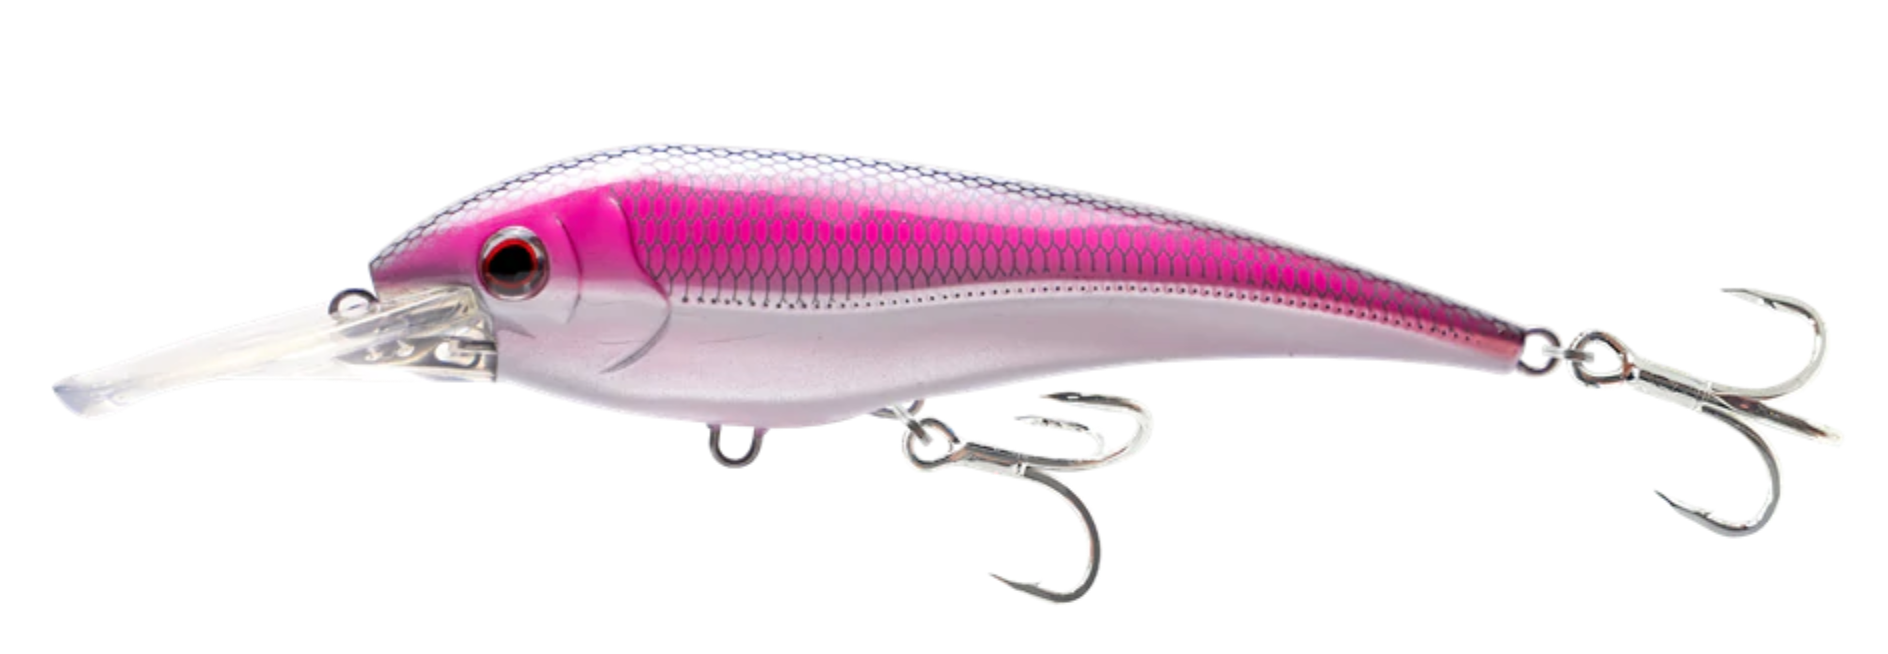 Nomad DTX Minnow Shallow Floating